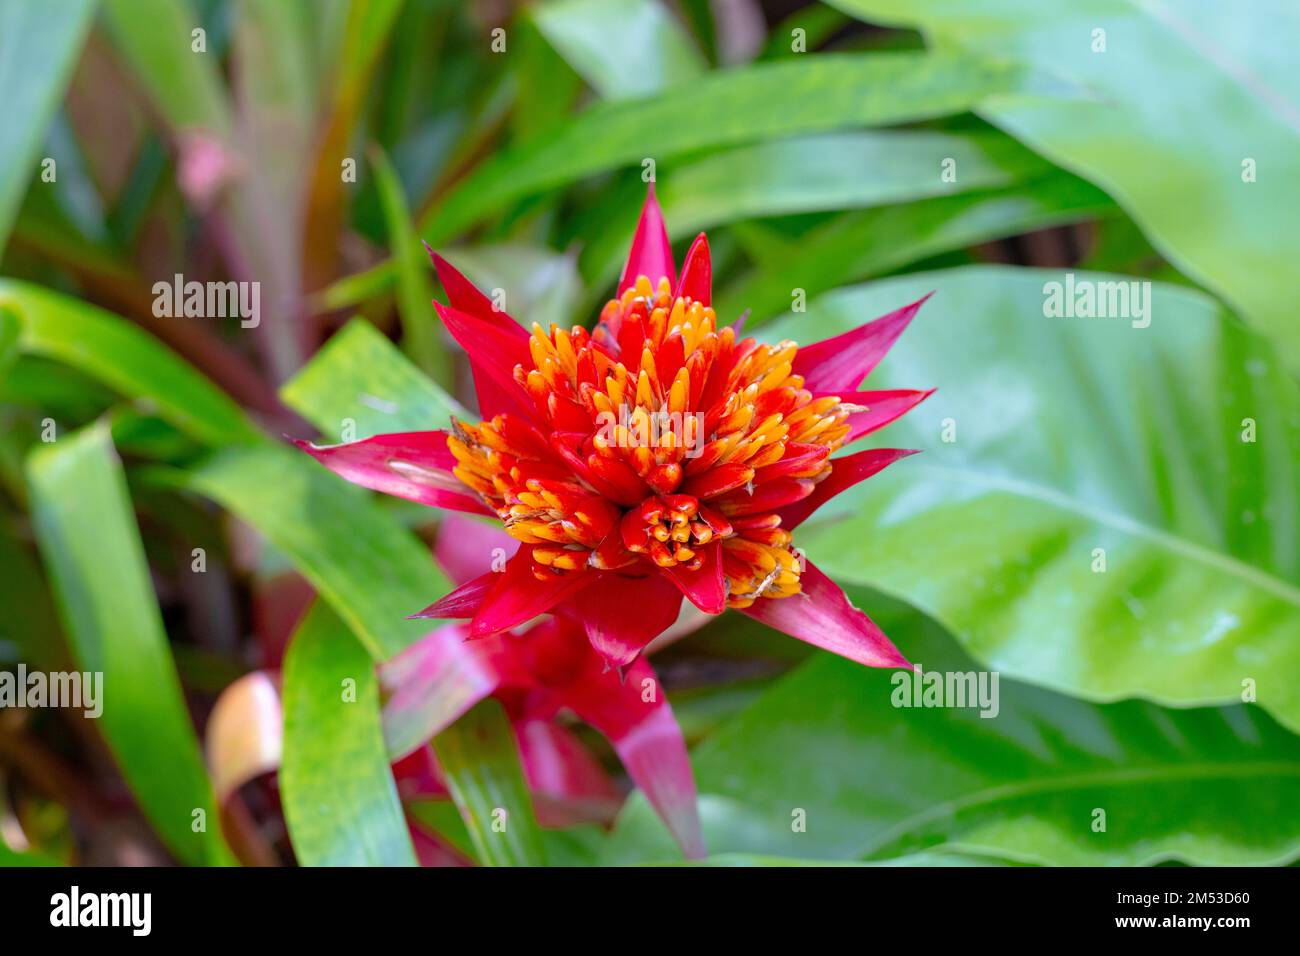 A red blooming bromeliad flower. Beautiful tropical plants. Stock Photo